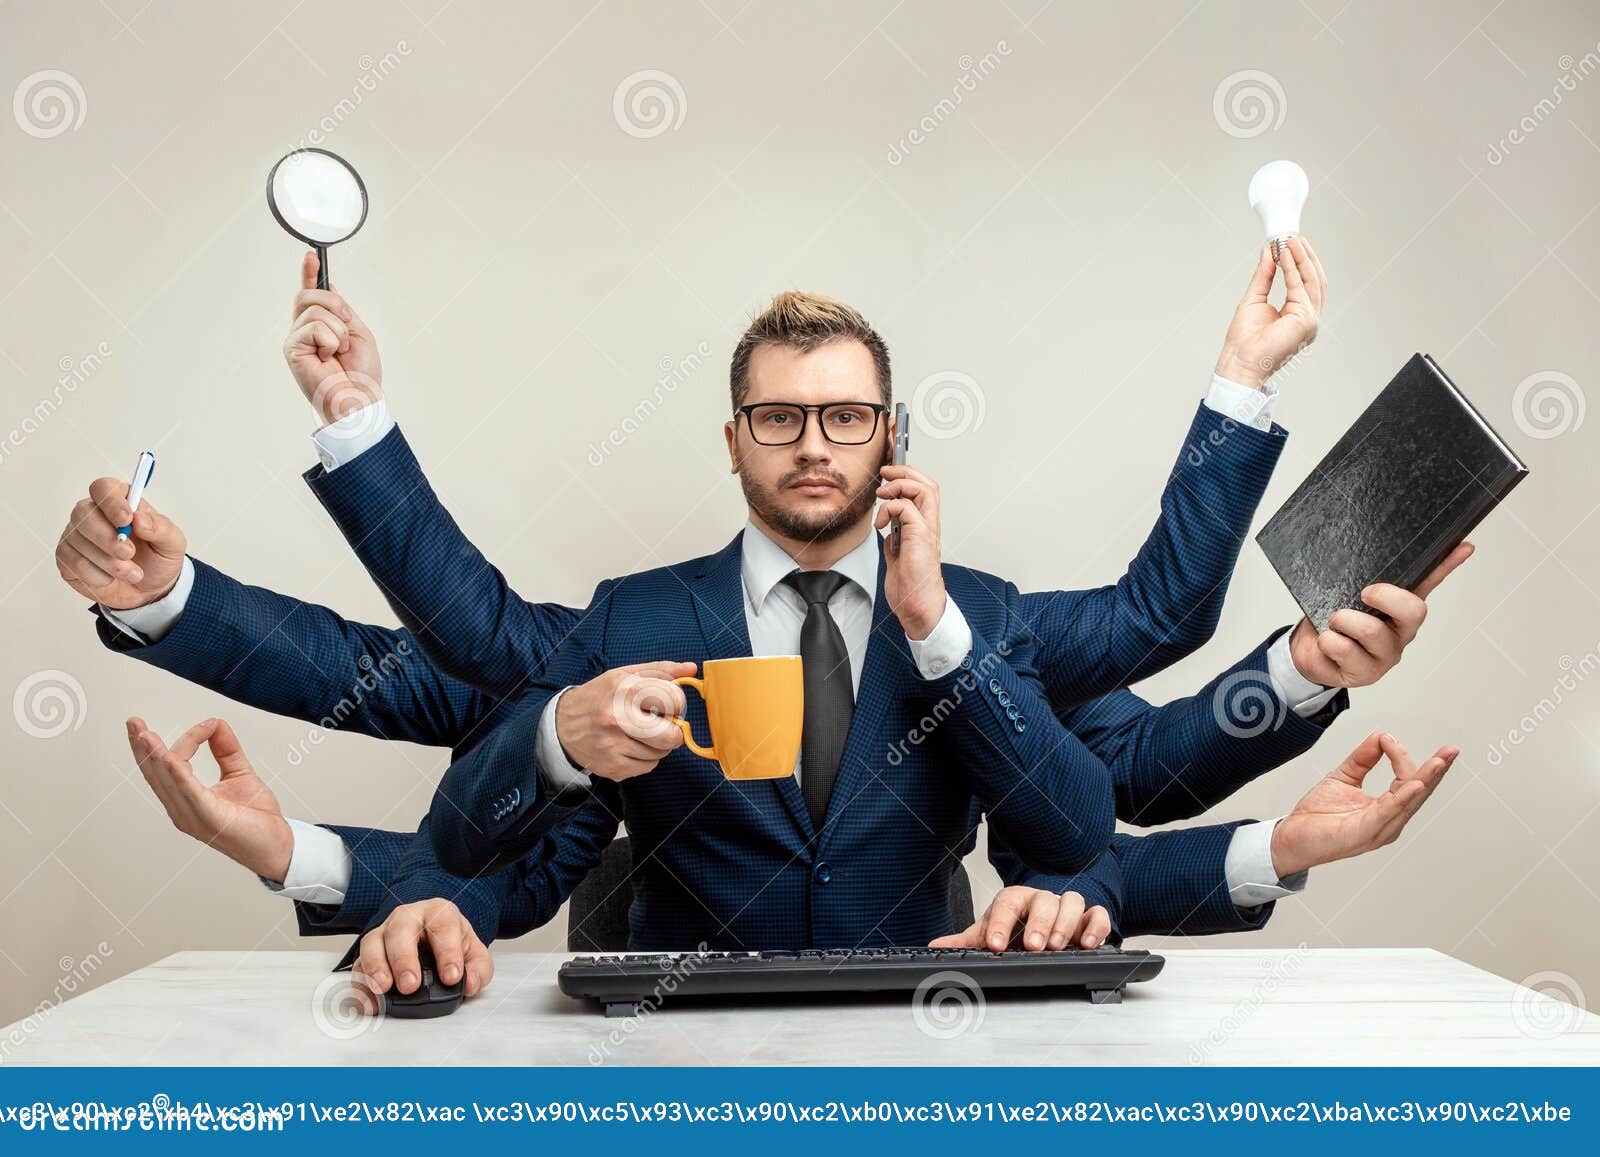 businessman with many hands in a suit. works simultaneously with several objects, a mug, a magnifying glass, papers, a contract, a